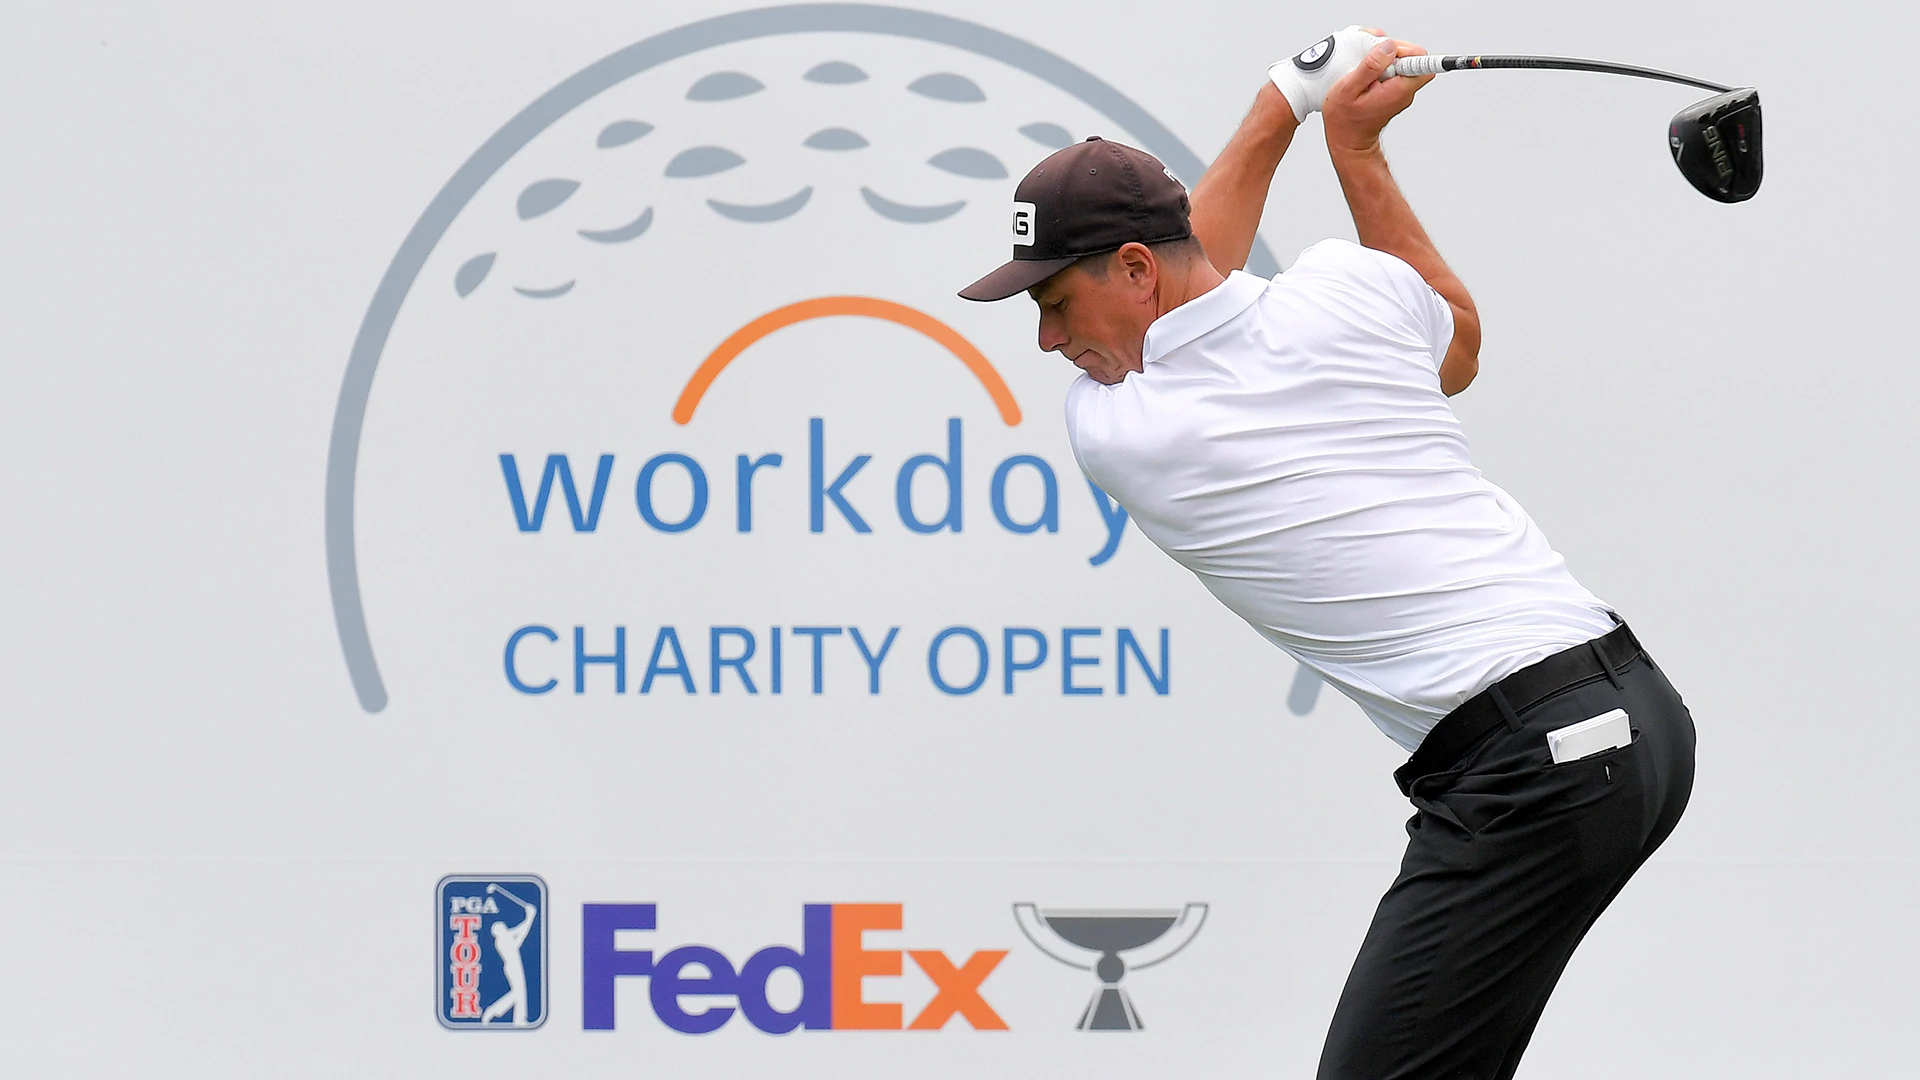 Workday steps in again, this time to sponsor relocated WGC event in Florida